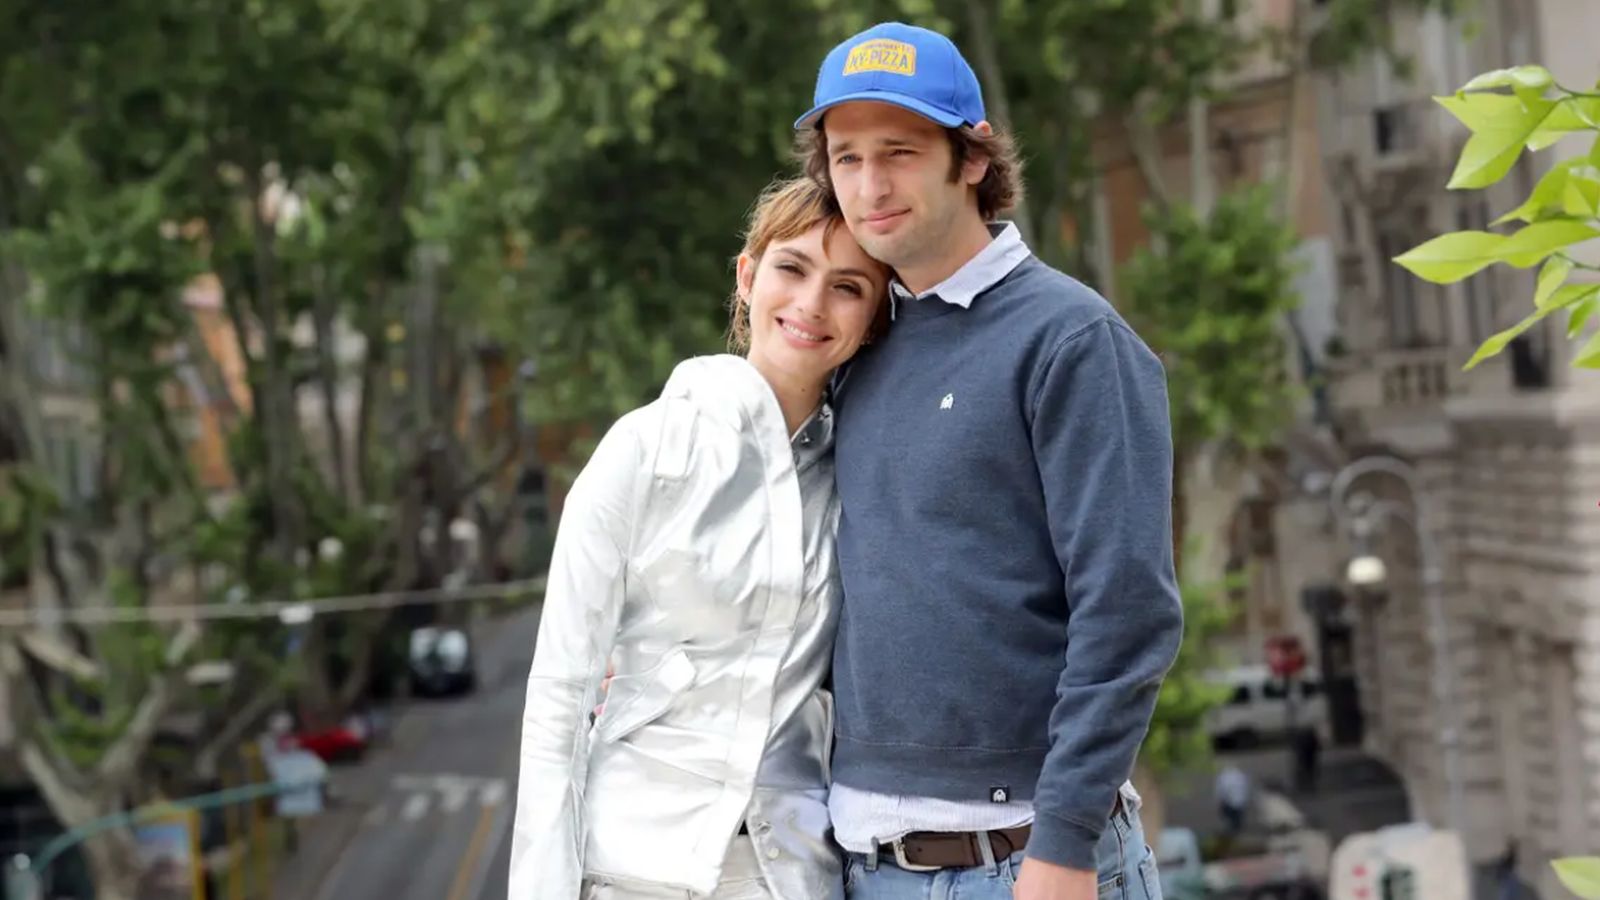 Signs of Love: the protagonists Hopper Jack Penn and Zoë Bleu in Florence on May 12th